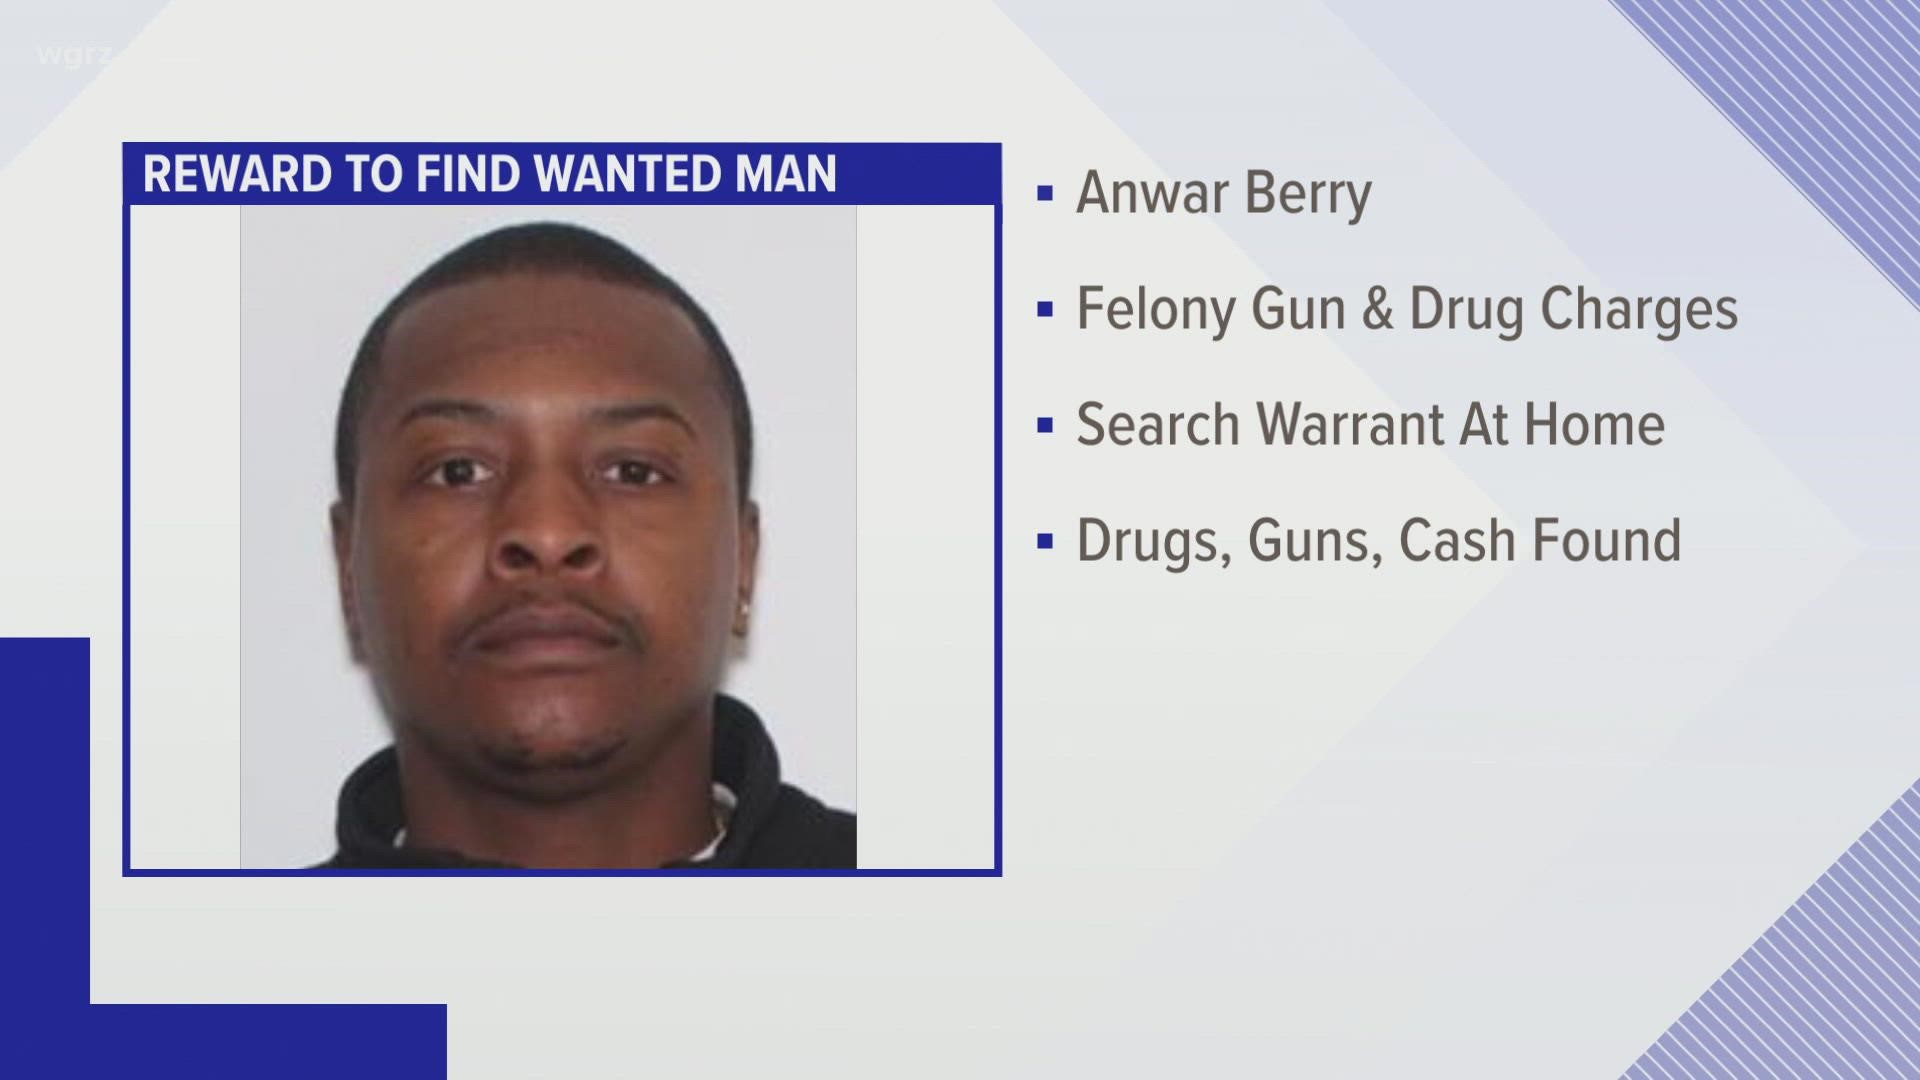 Anwar Berry is wanted by the Erie County Sheriff's Office for felony narcotics and firearm charges.